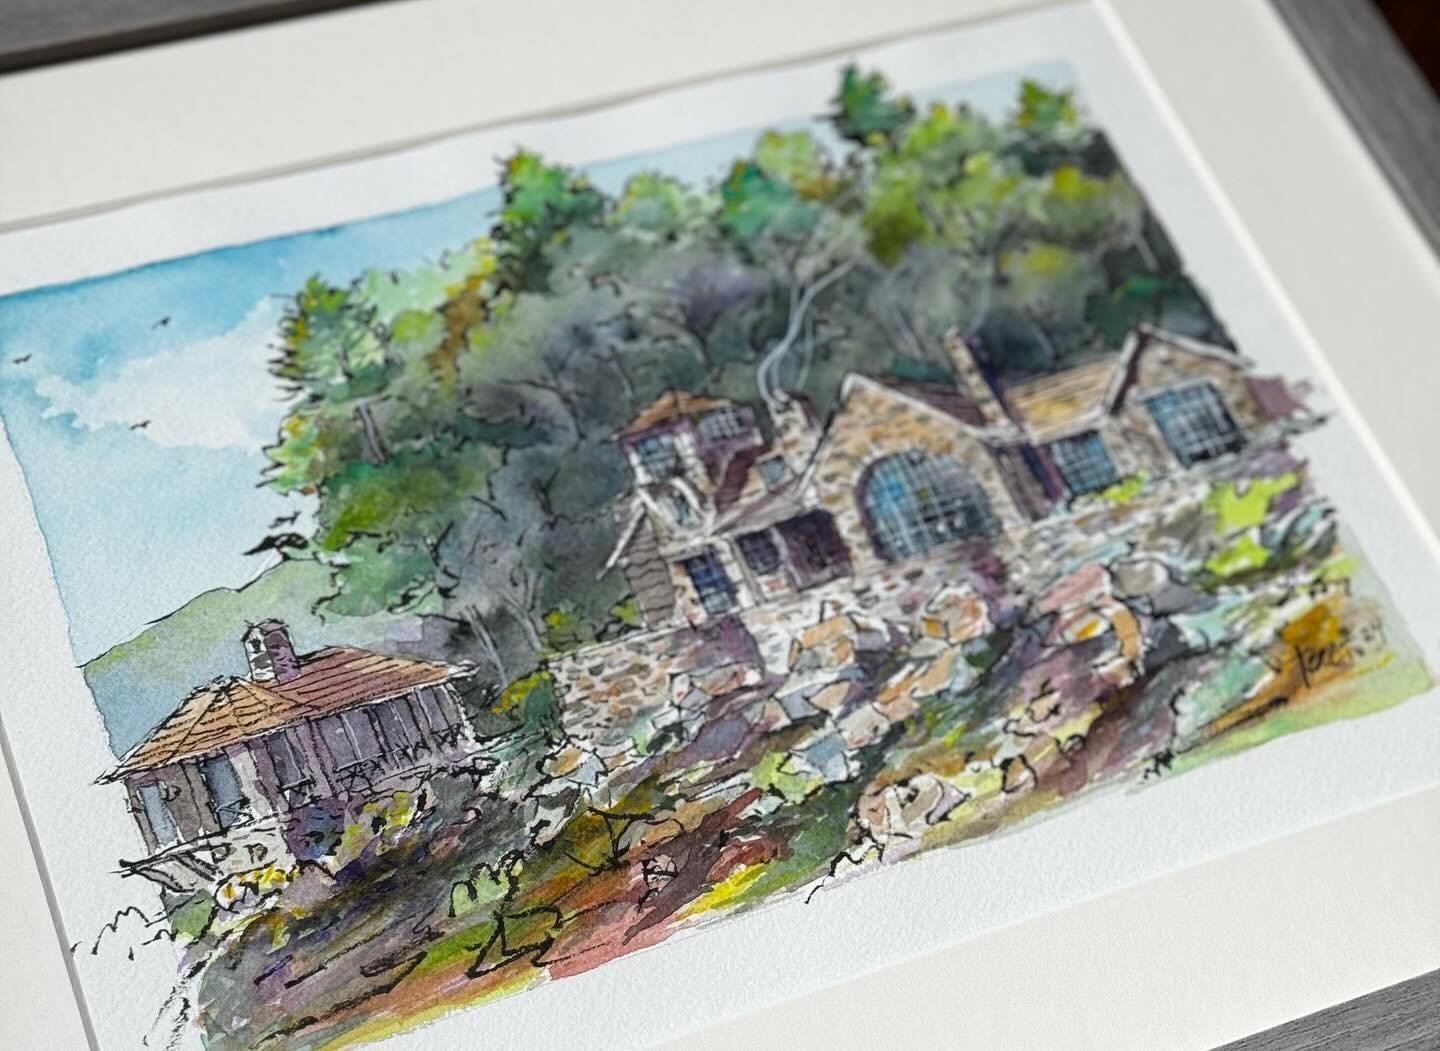 Client gift to celebrate the start of construction for this home deep in the eastern Oklahoma hills overlooking the Ouachita National Forest. @carlislemoorearchitects  #watercolor
&darr; 
&darr;
&darr;
#architect #TraditionalDesign #ArchitectDesigned